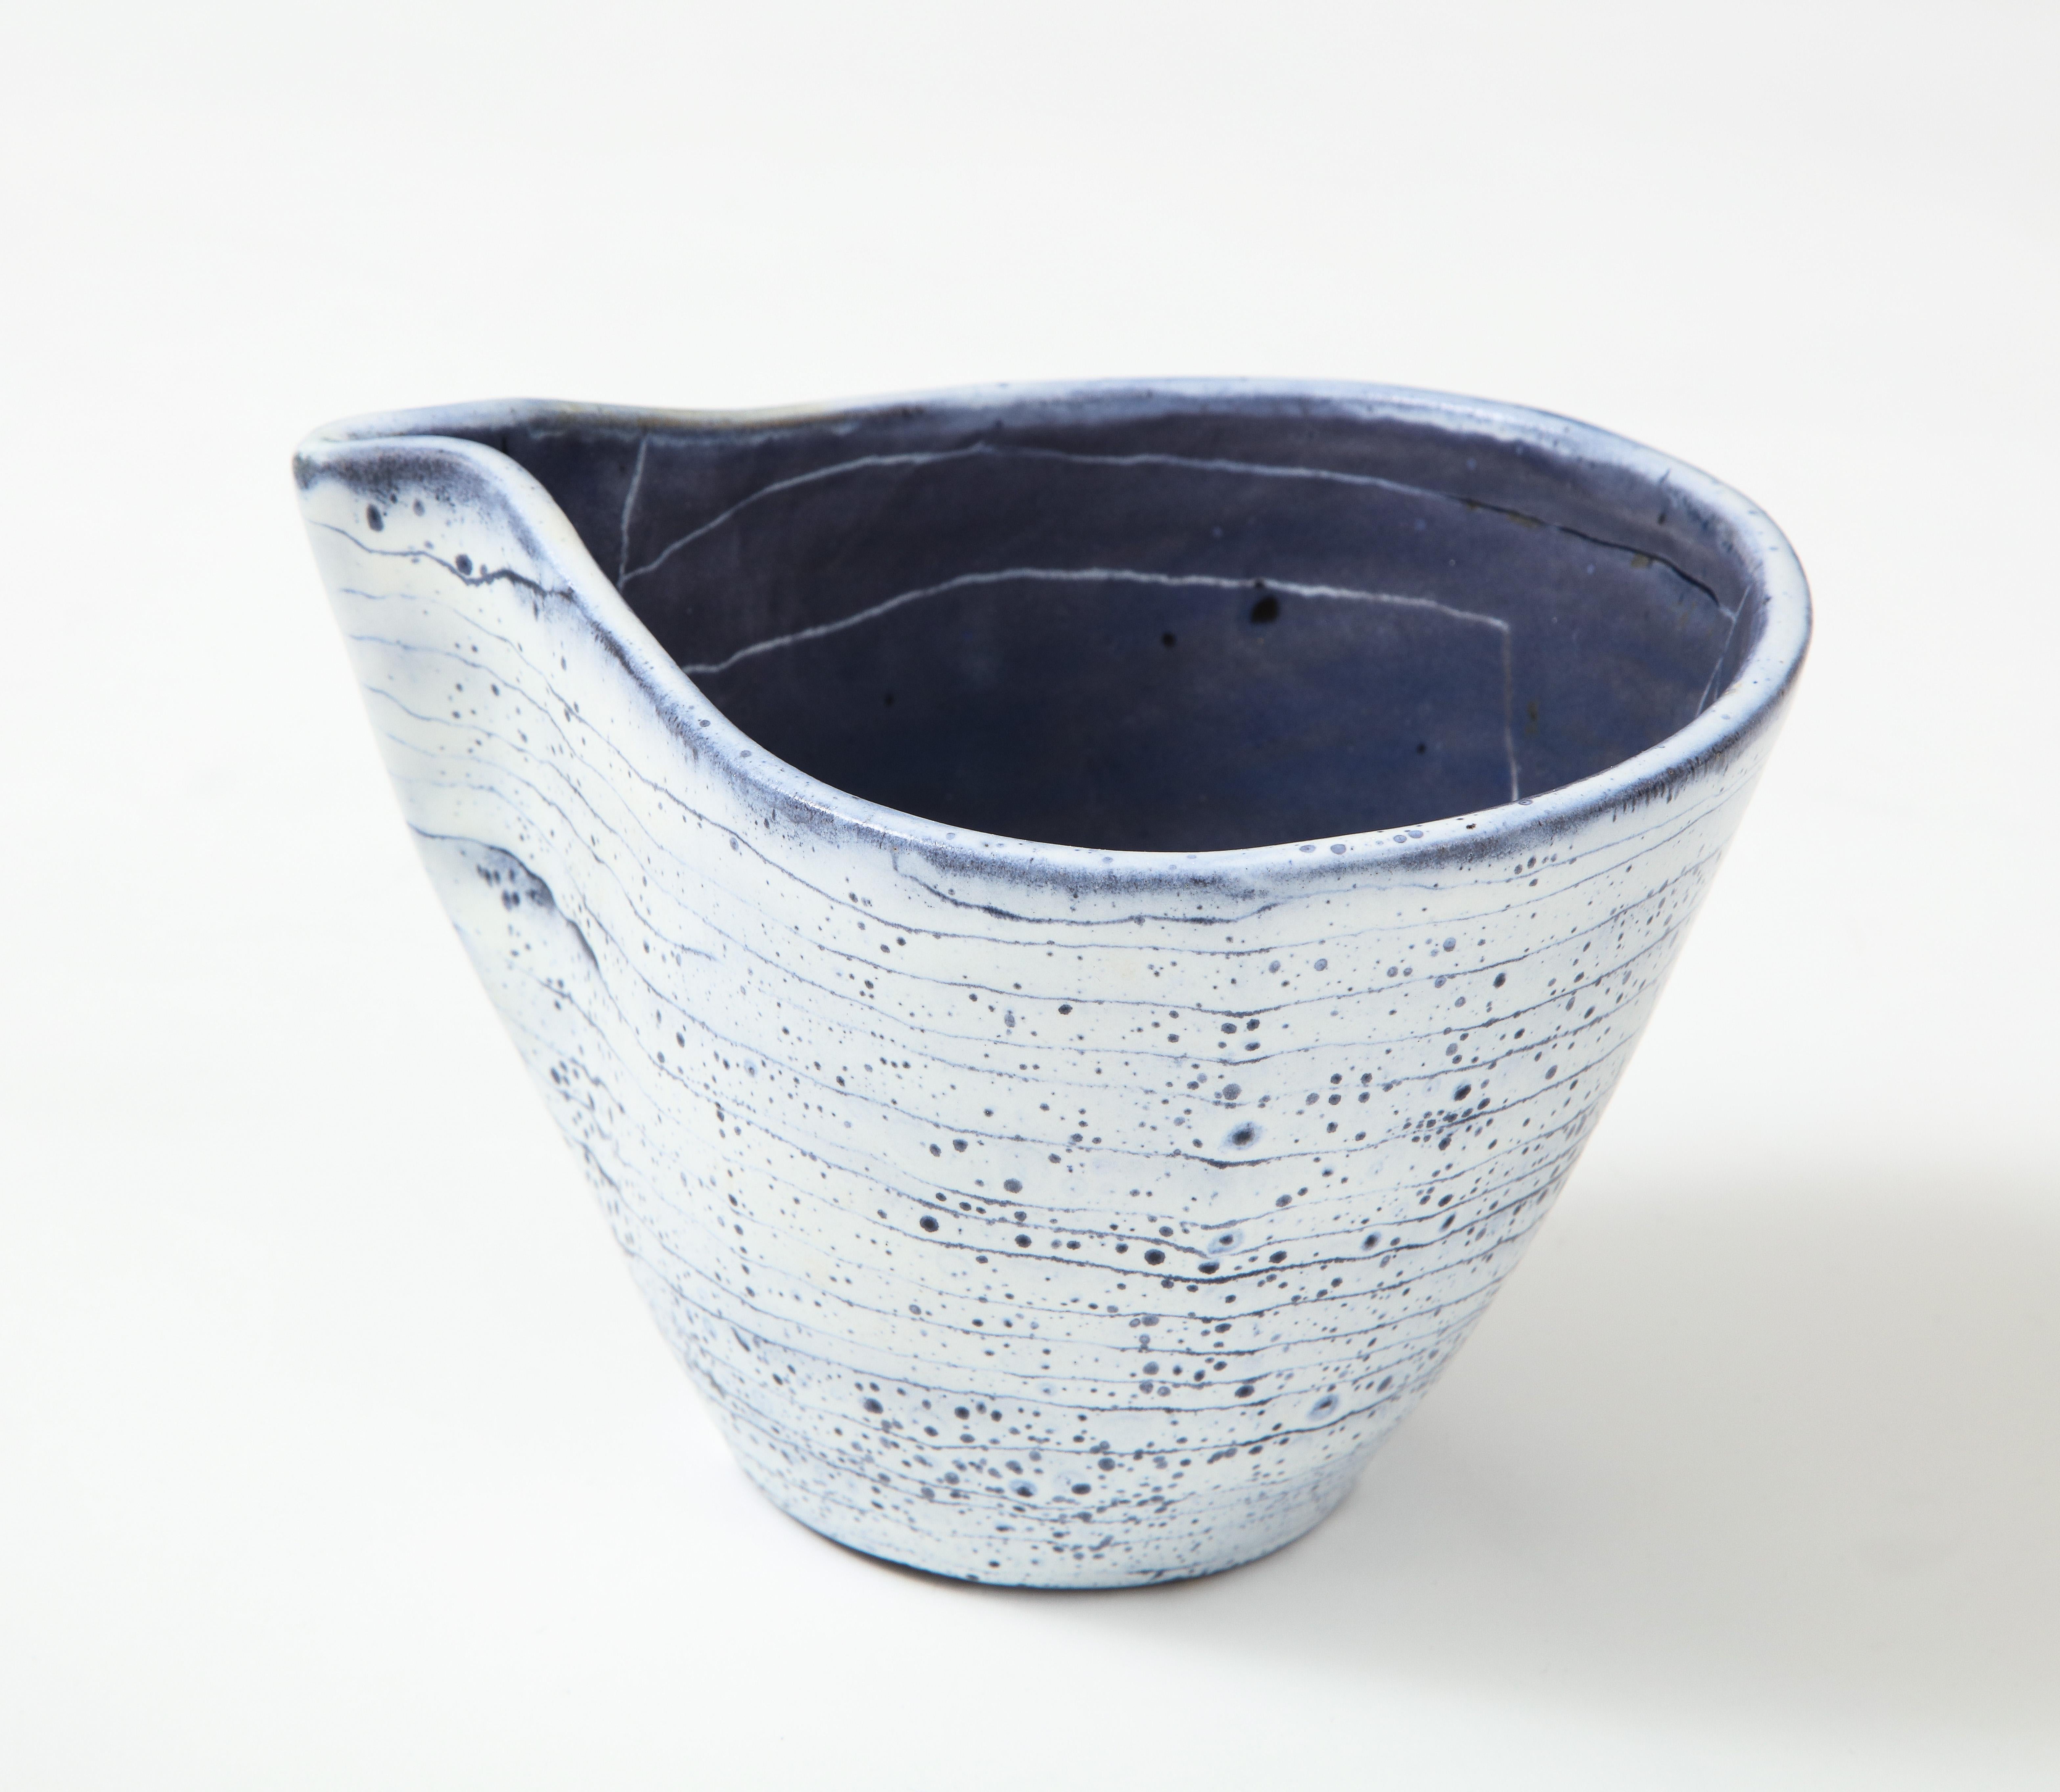 Mid-Century Modern Blue and Cream Ceramic Vessel by Mado Jolain, France, 1955 For Sale